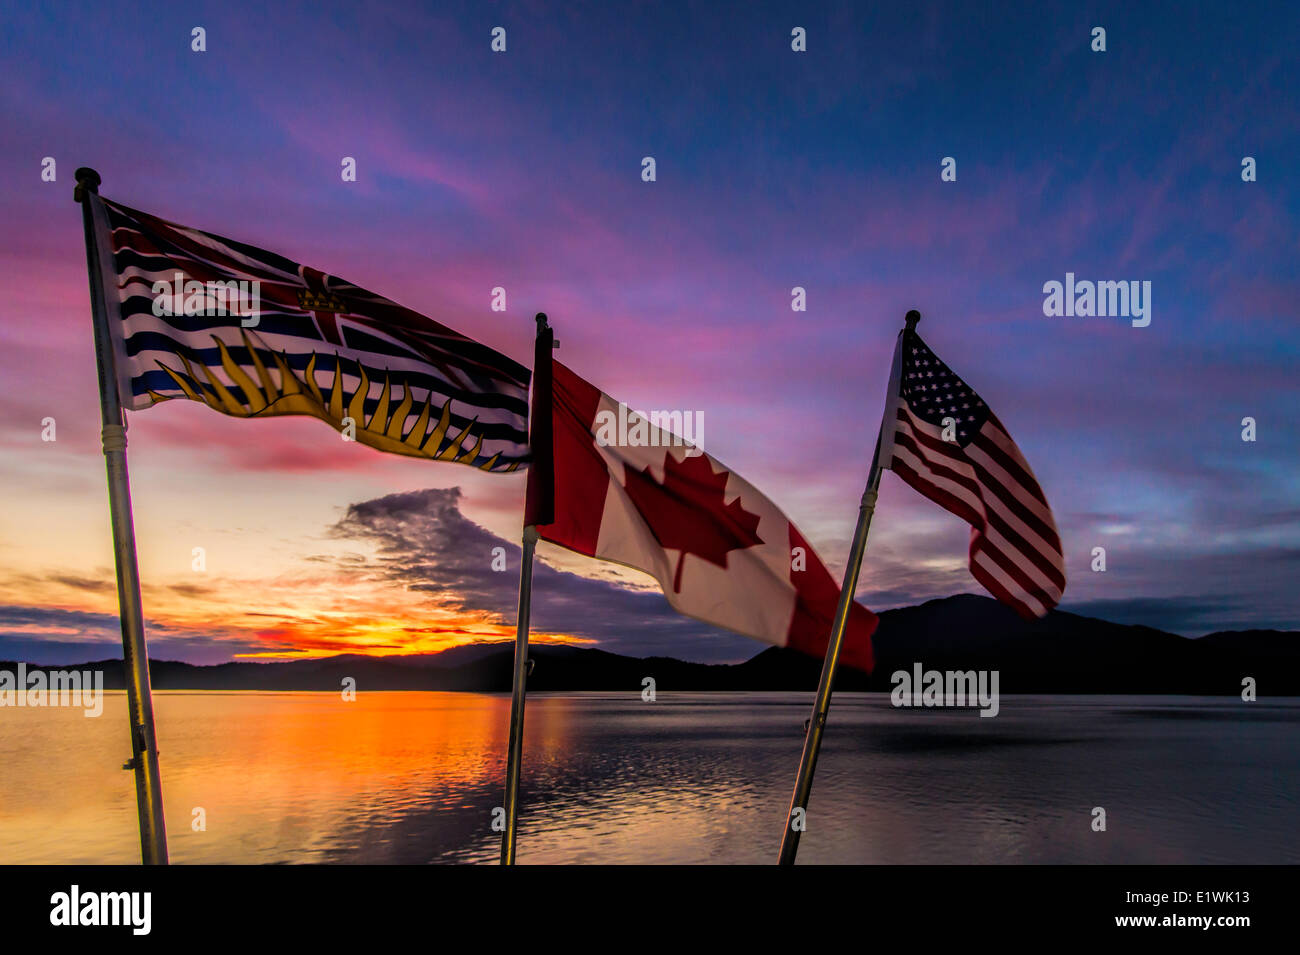 Flags at sunset over looking ocean Stock Photo